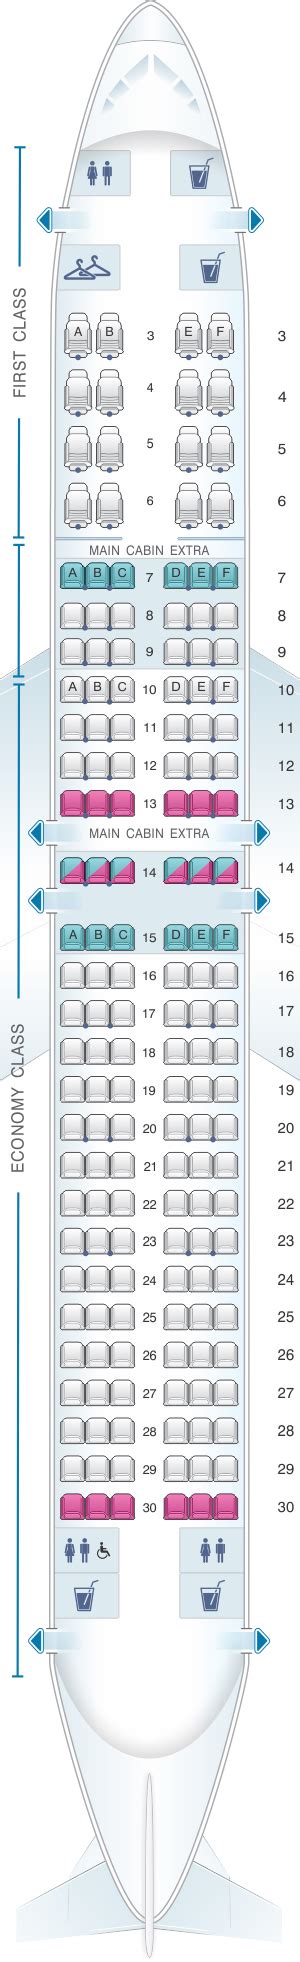 american airlines boeing 737-800 seat chart